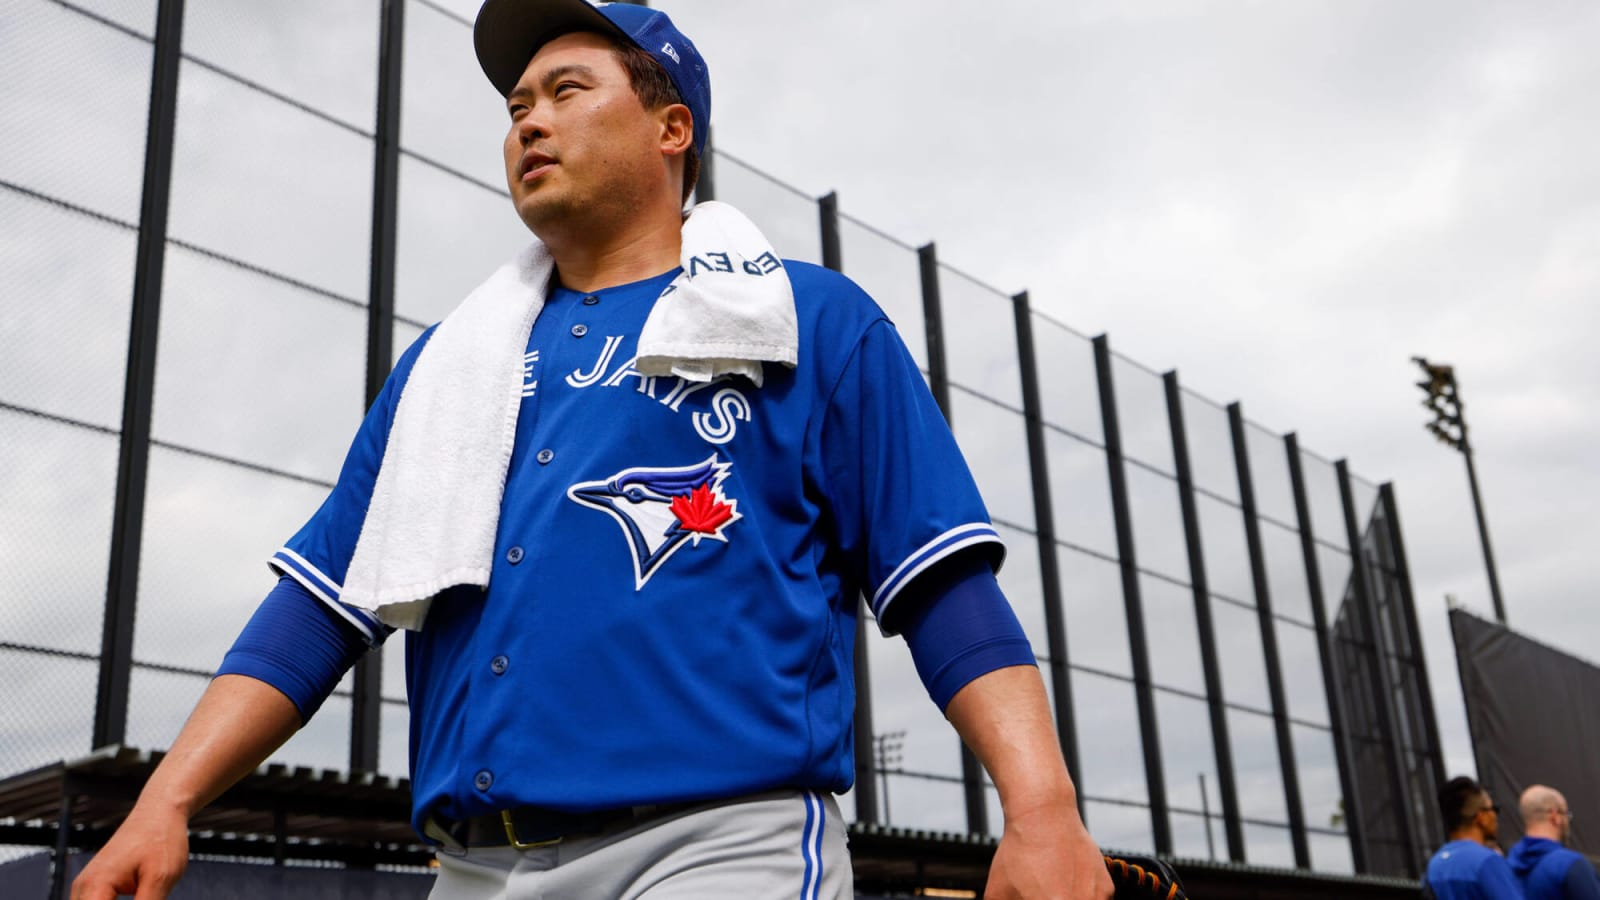 'He did a good job of taking me under his wing,' Alek Manoah and more speak about Hyun Jin Ryu’s impact as a Blue Jay